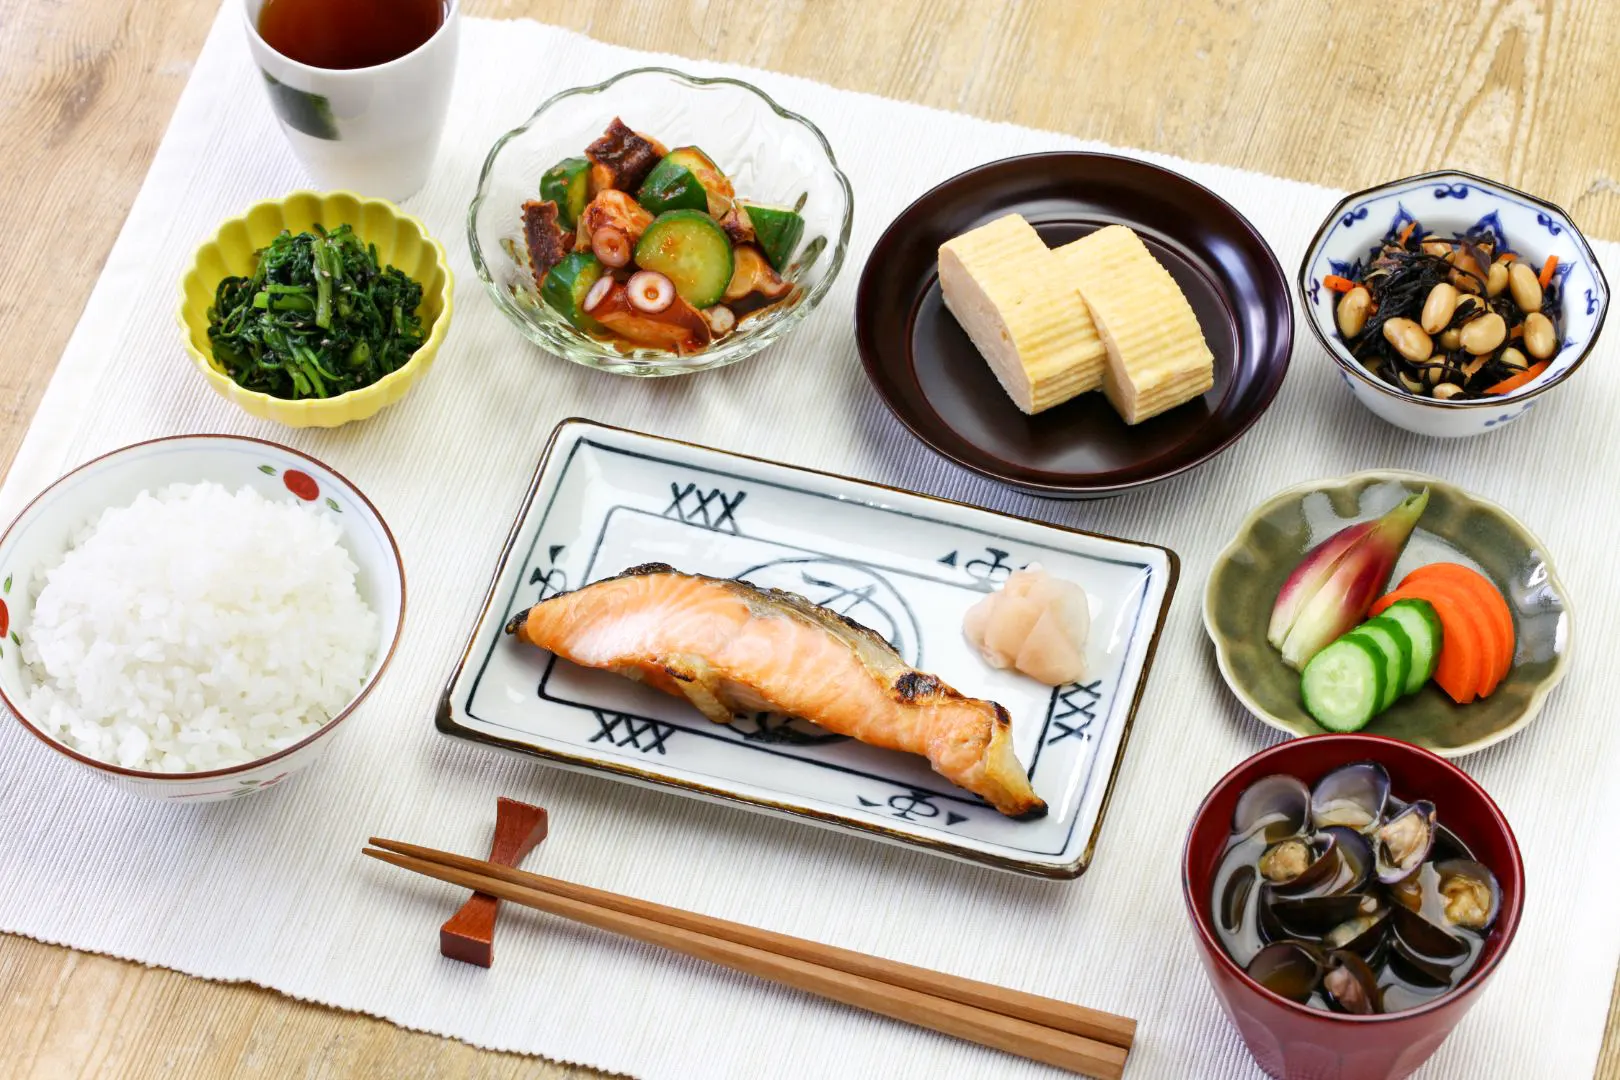 A traditional Japanese meal laid out on a white fabric placemat. There is rice to the left, soup to the right and fish in the center. There are four side dishes plus pickles, and a cup of dark-colored tea. There are wooden chopsticks sitting on a red chopstick rest at the front of the meal, with the tip of the chopsticks facing to the left.